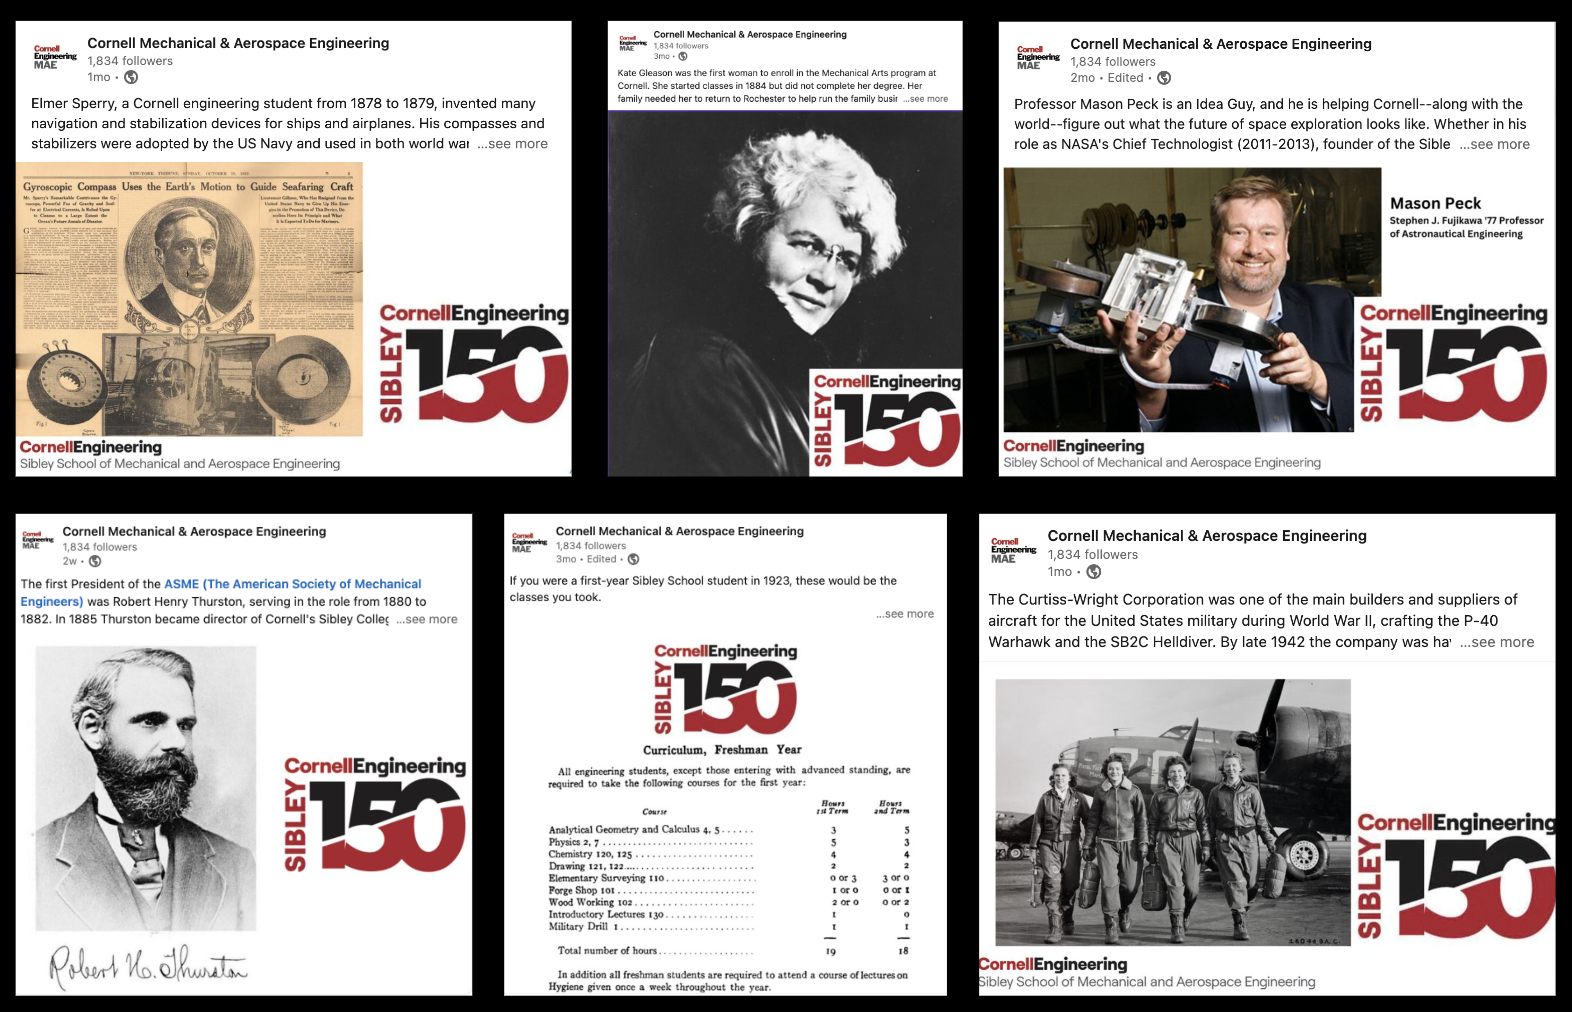 montage showing six LinkedIn posts, each featuring a person or event from the past 150 years of the Sibley School.